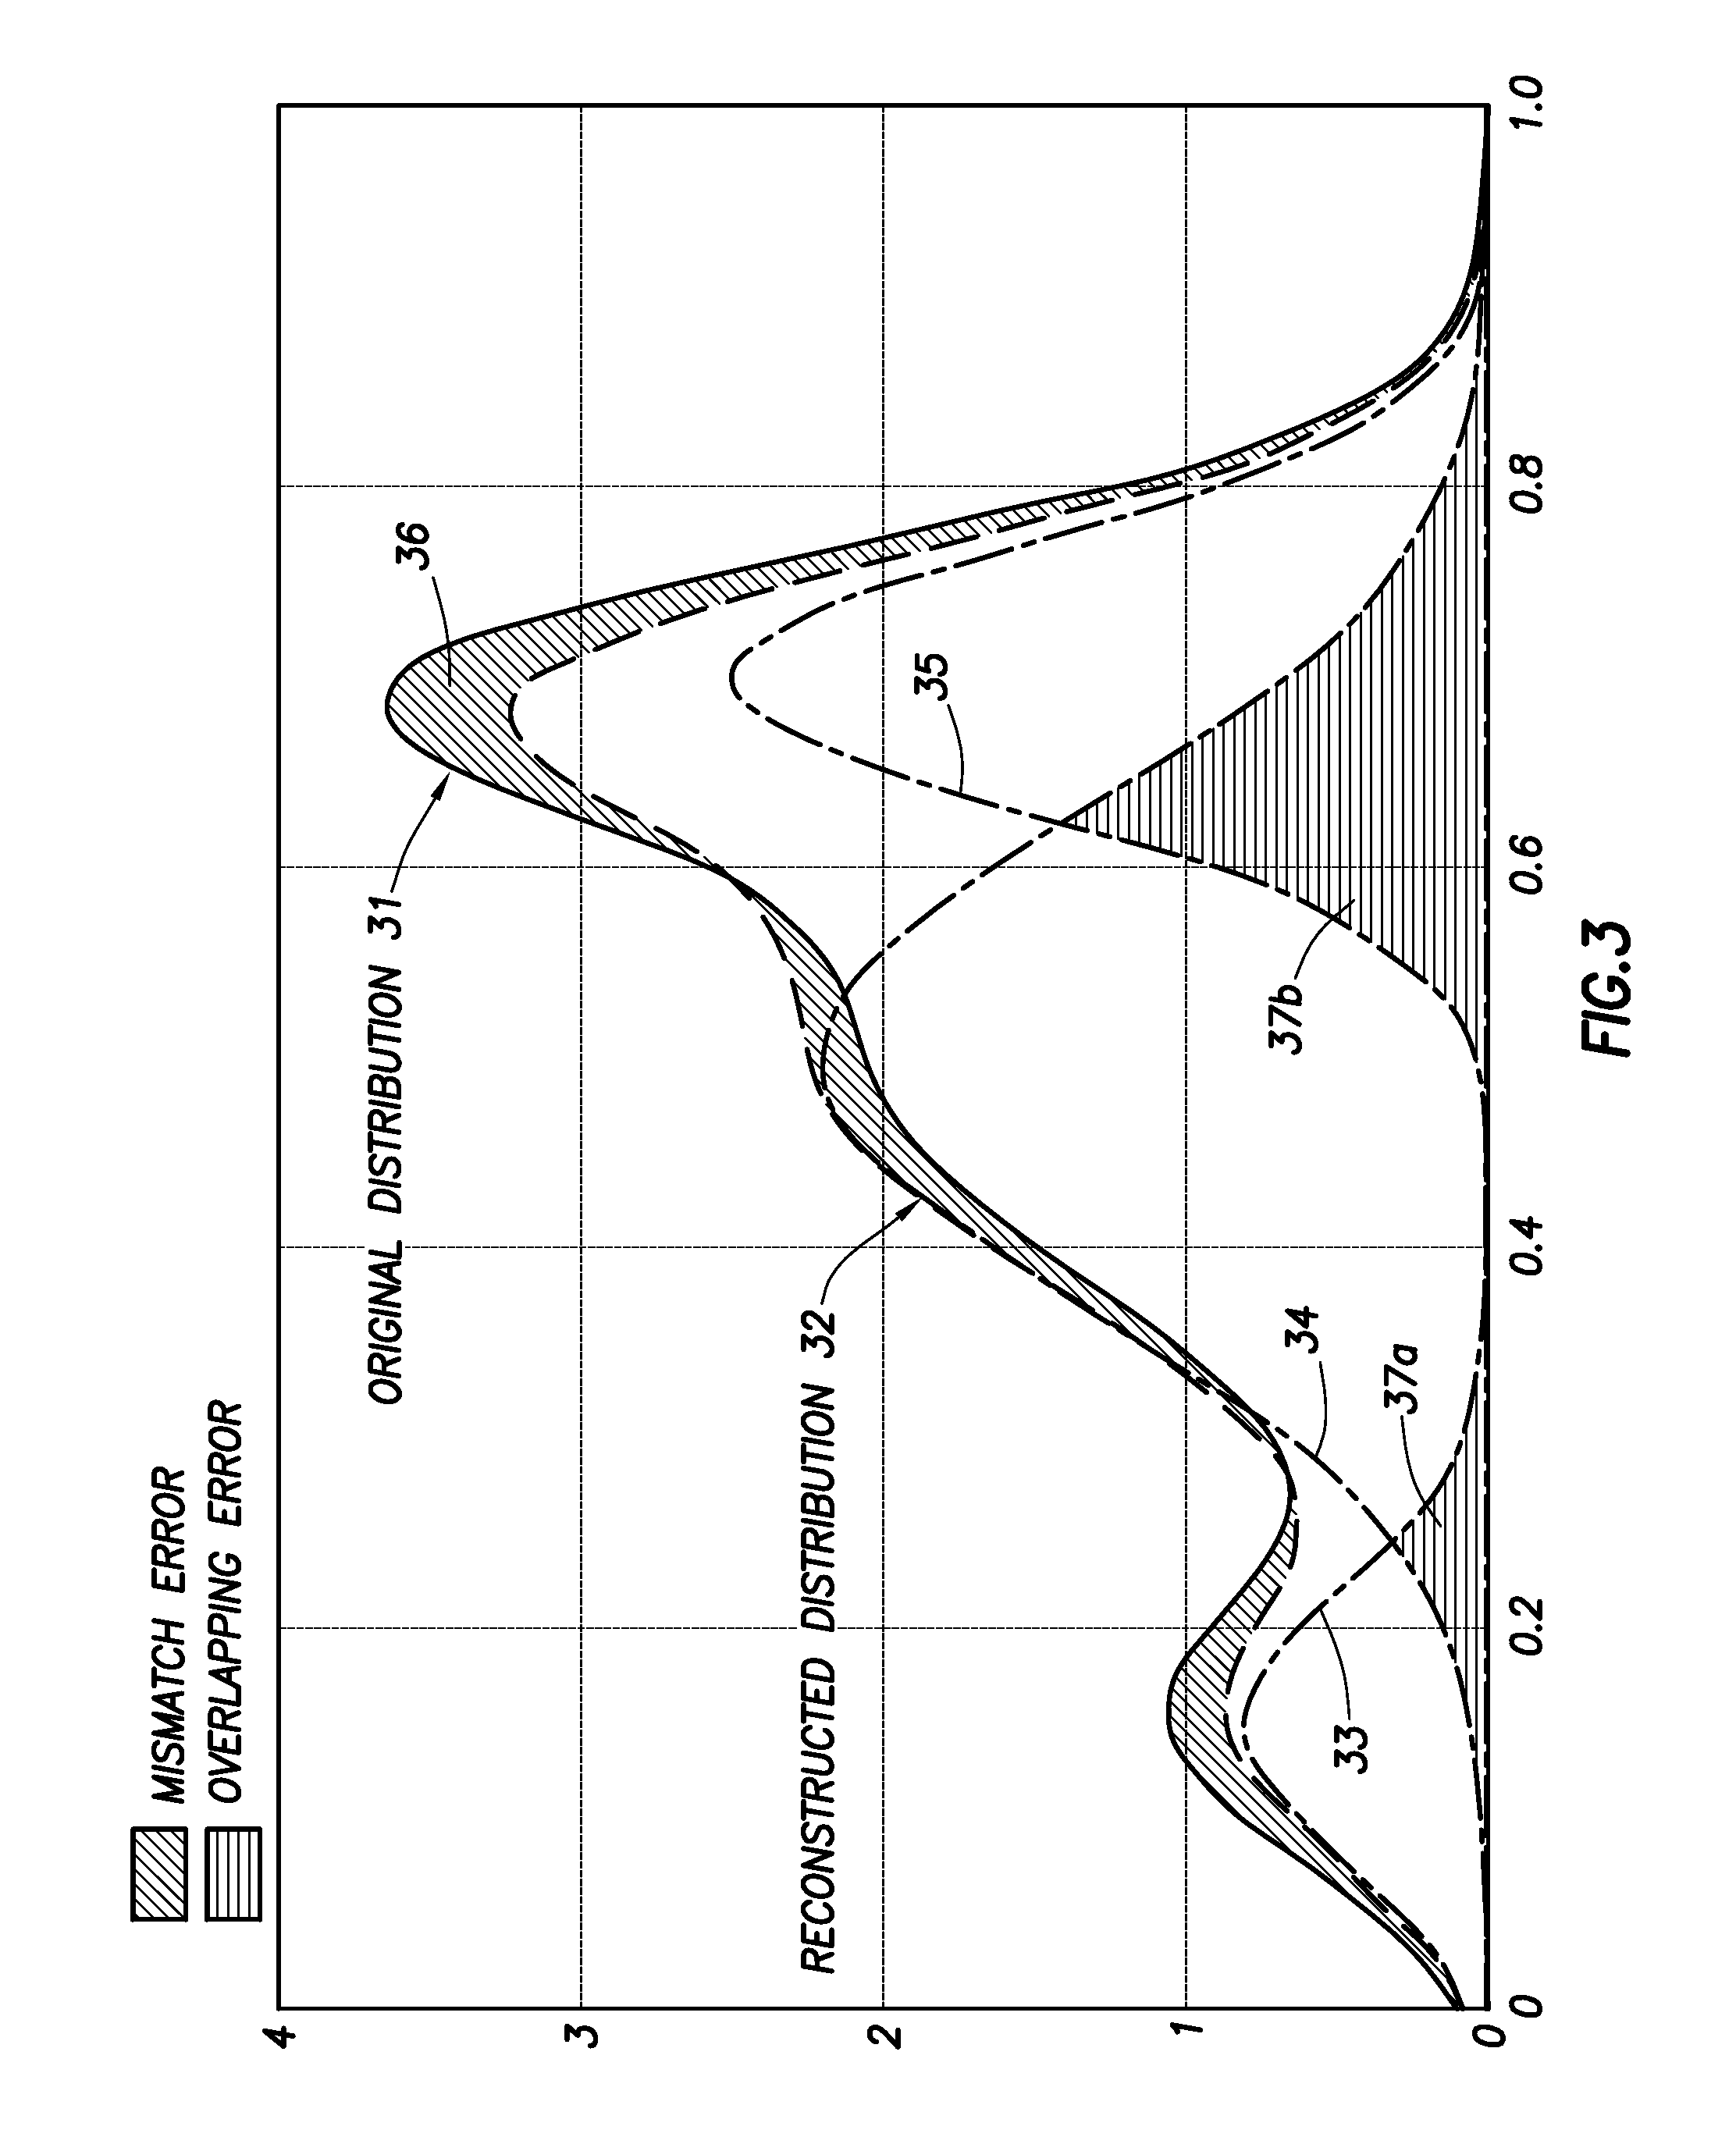 Methodology and Application of Multimodal Decomposition of a Composite Distribution